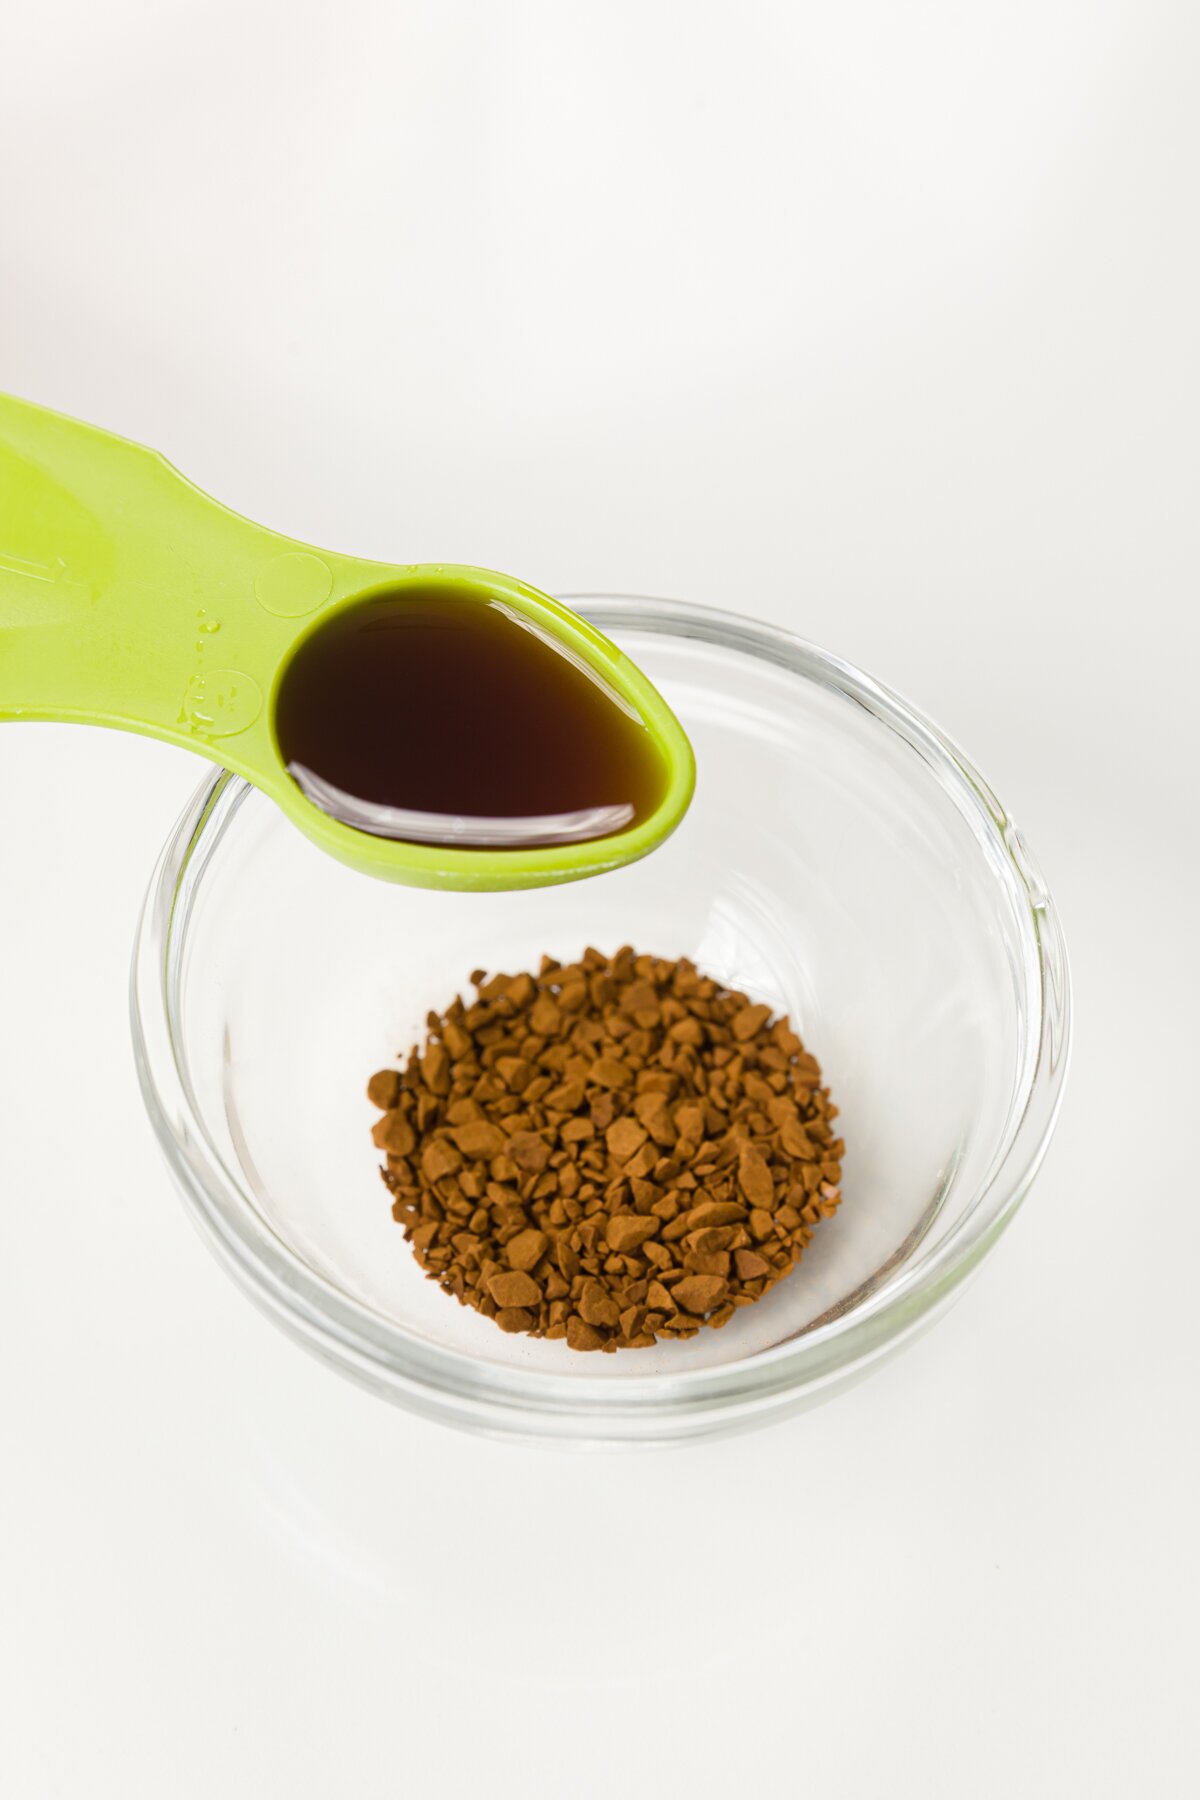 Green tablespoon with vanilla extract held over a glass prep bowl with instant coffee granules in it